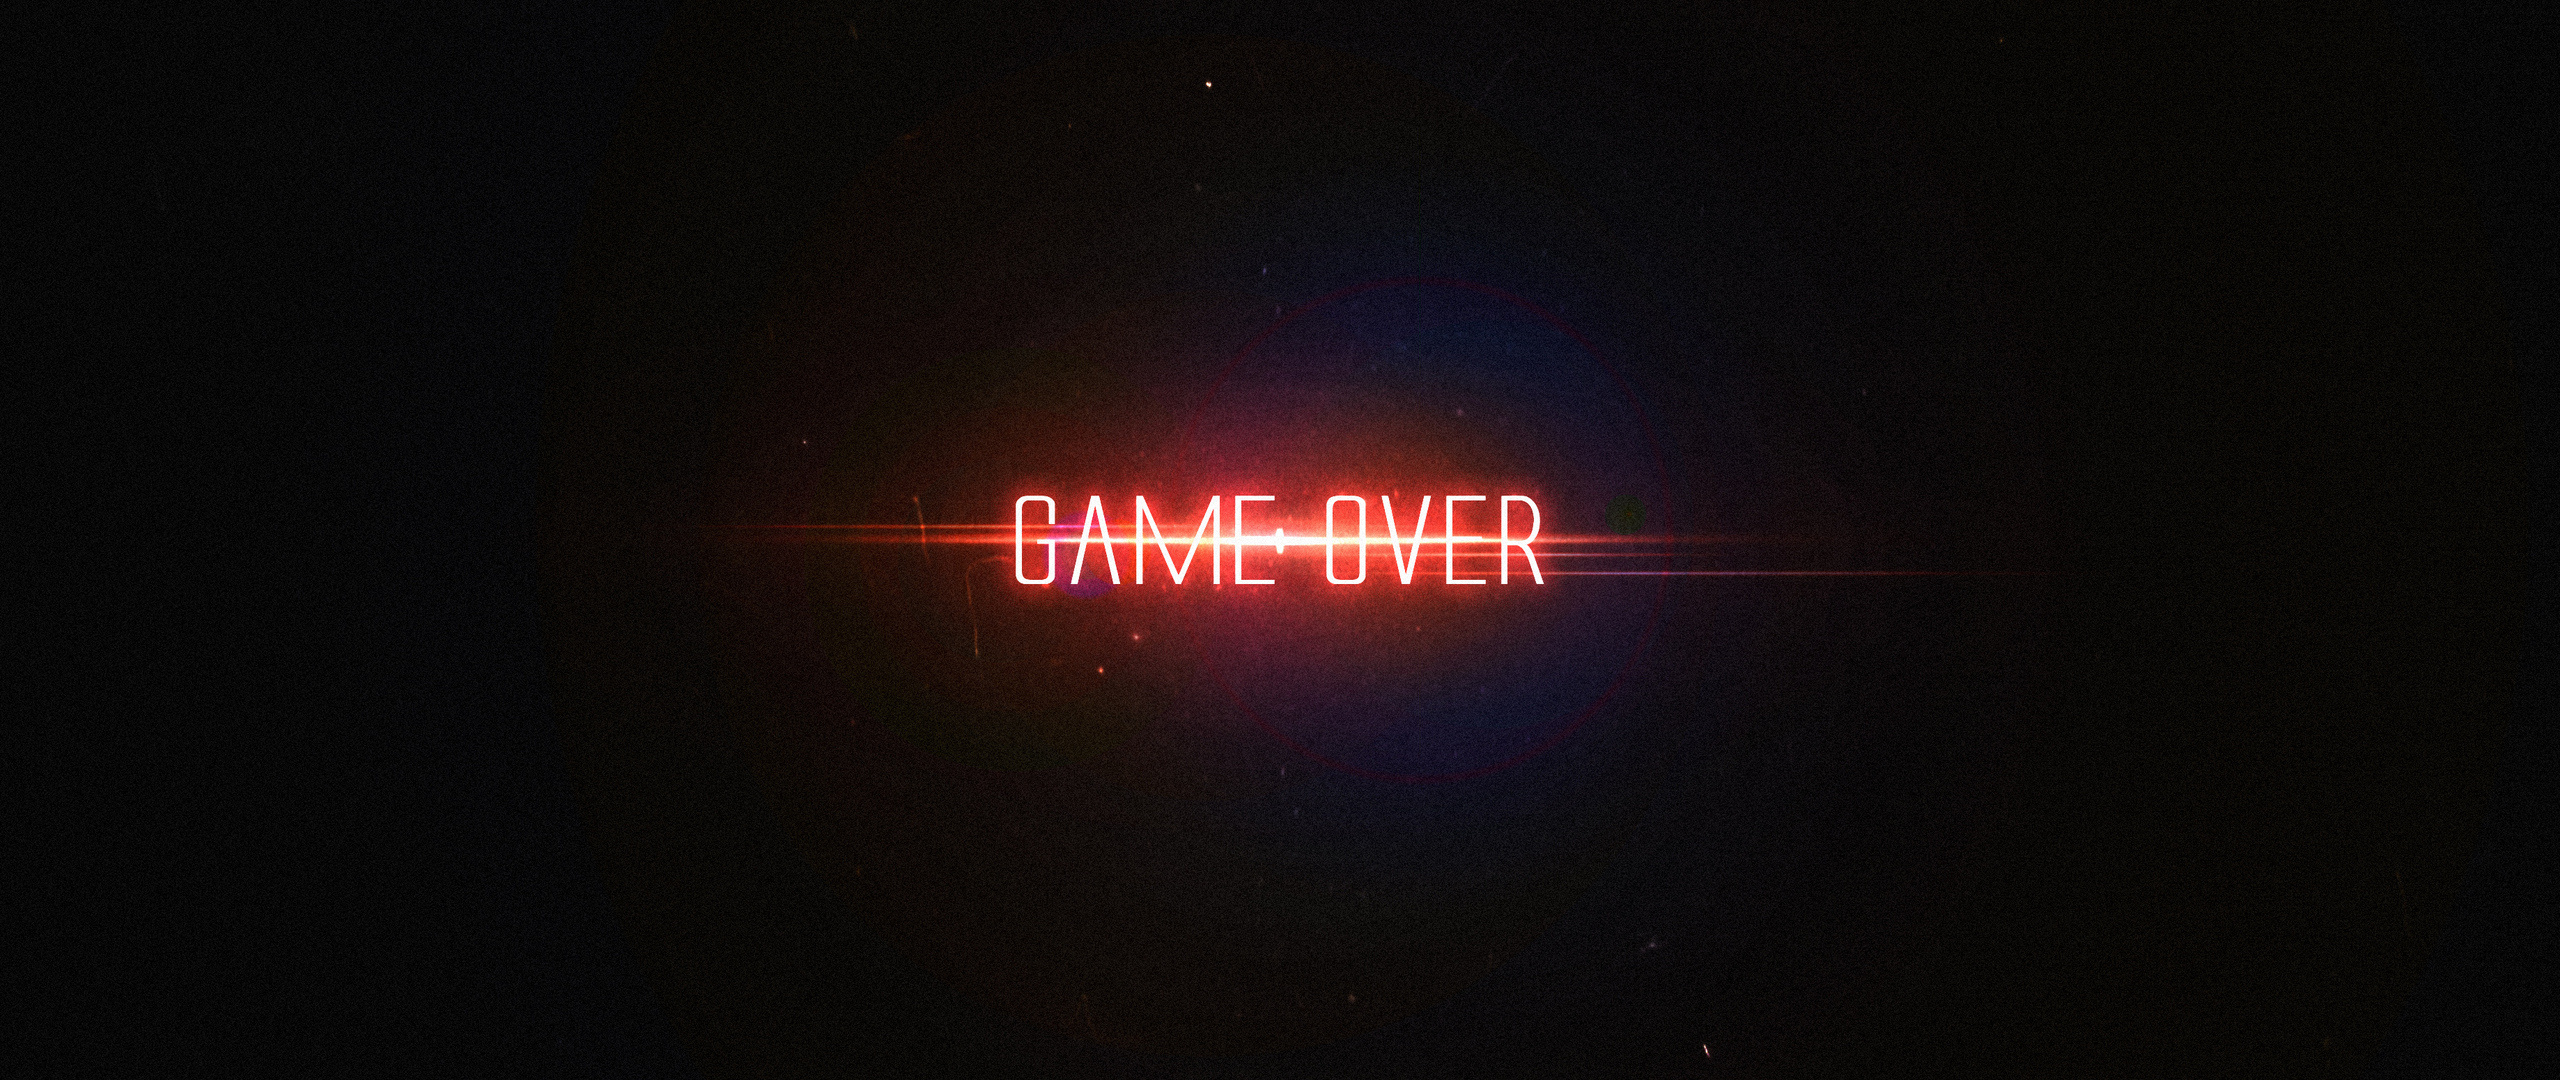 Game Over, Typography art, High resolution, Clear text, 2560x1080 Dual Screen Desktop